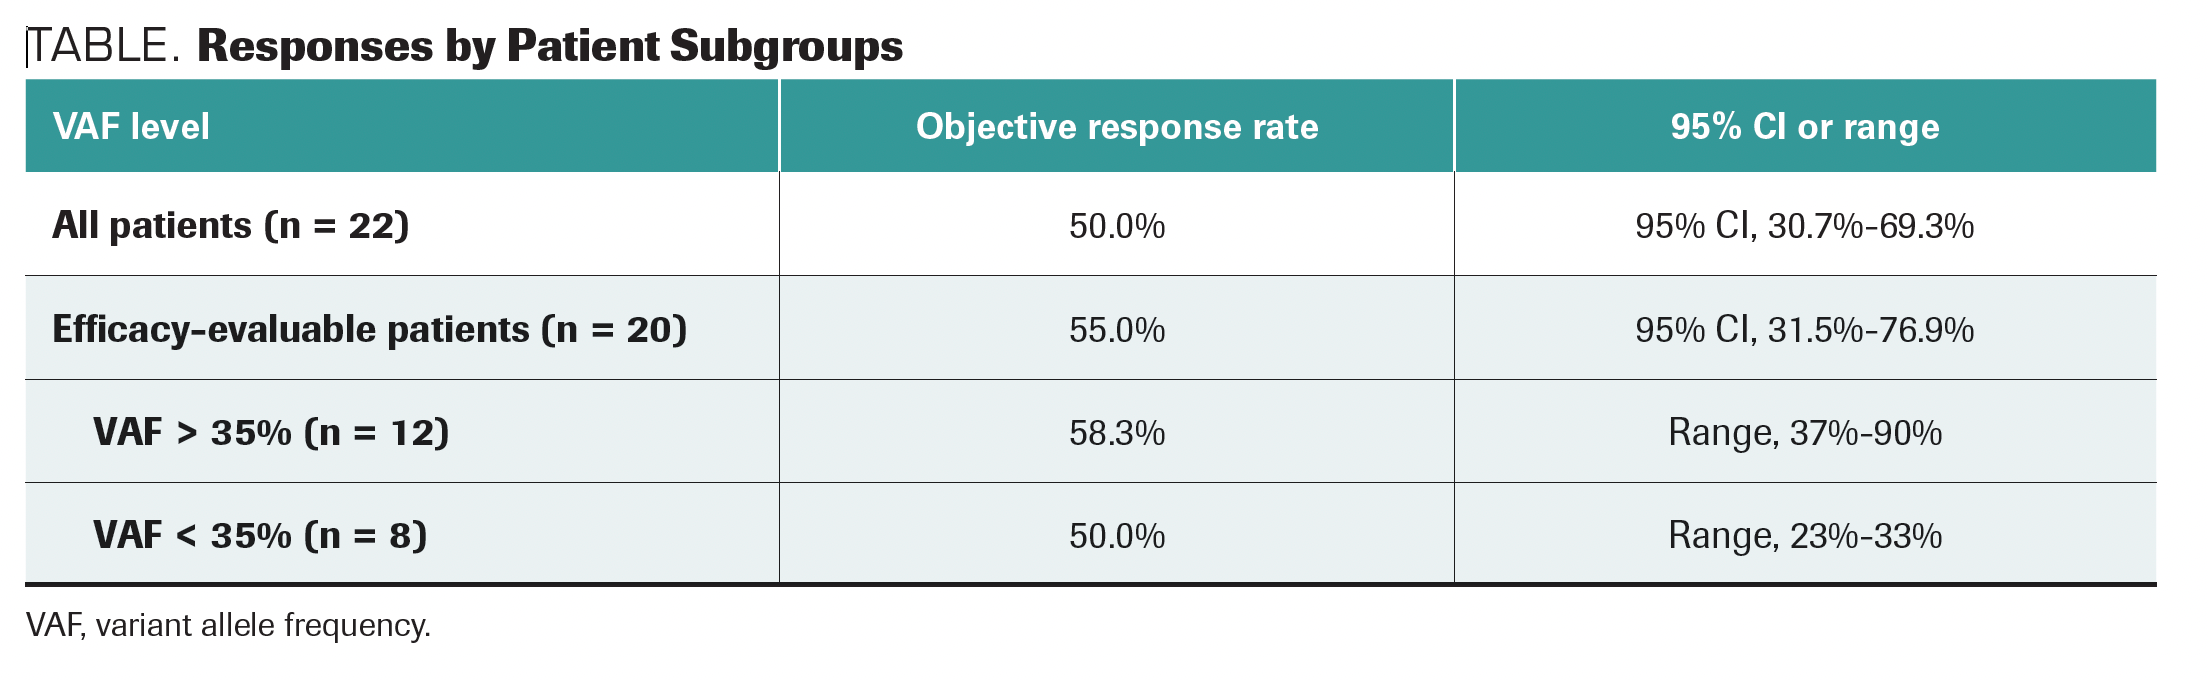 TABLE. Responses by Patient Subgroups